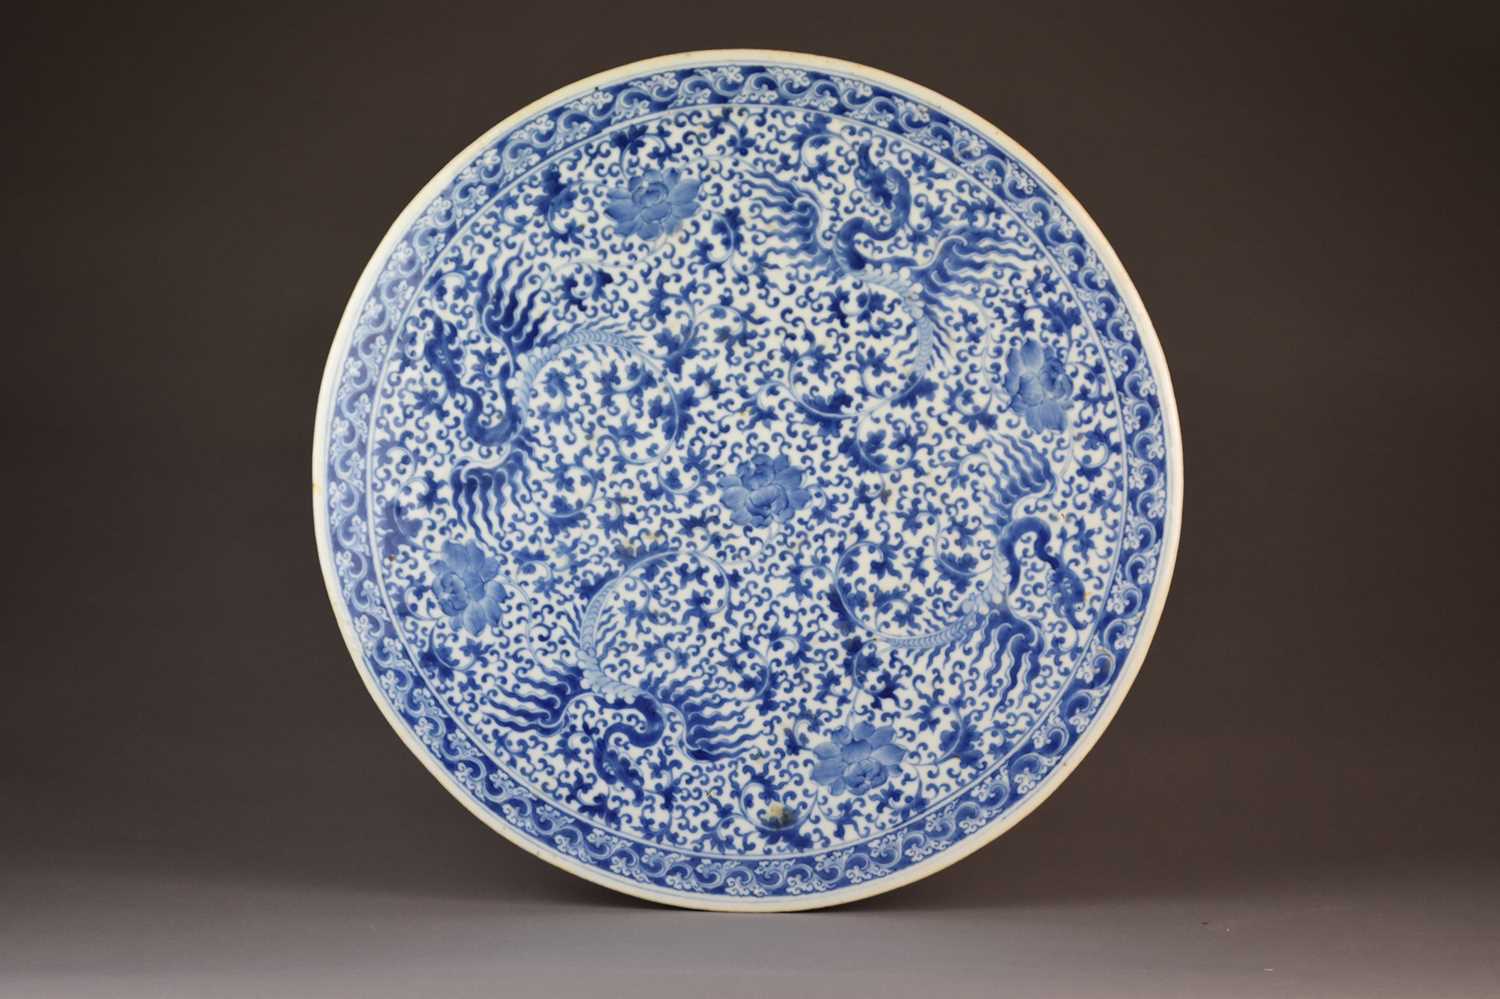 Lot 16 - A large Chinese blue and white circular plaque or table top, 19th century